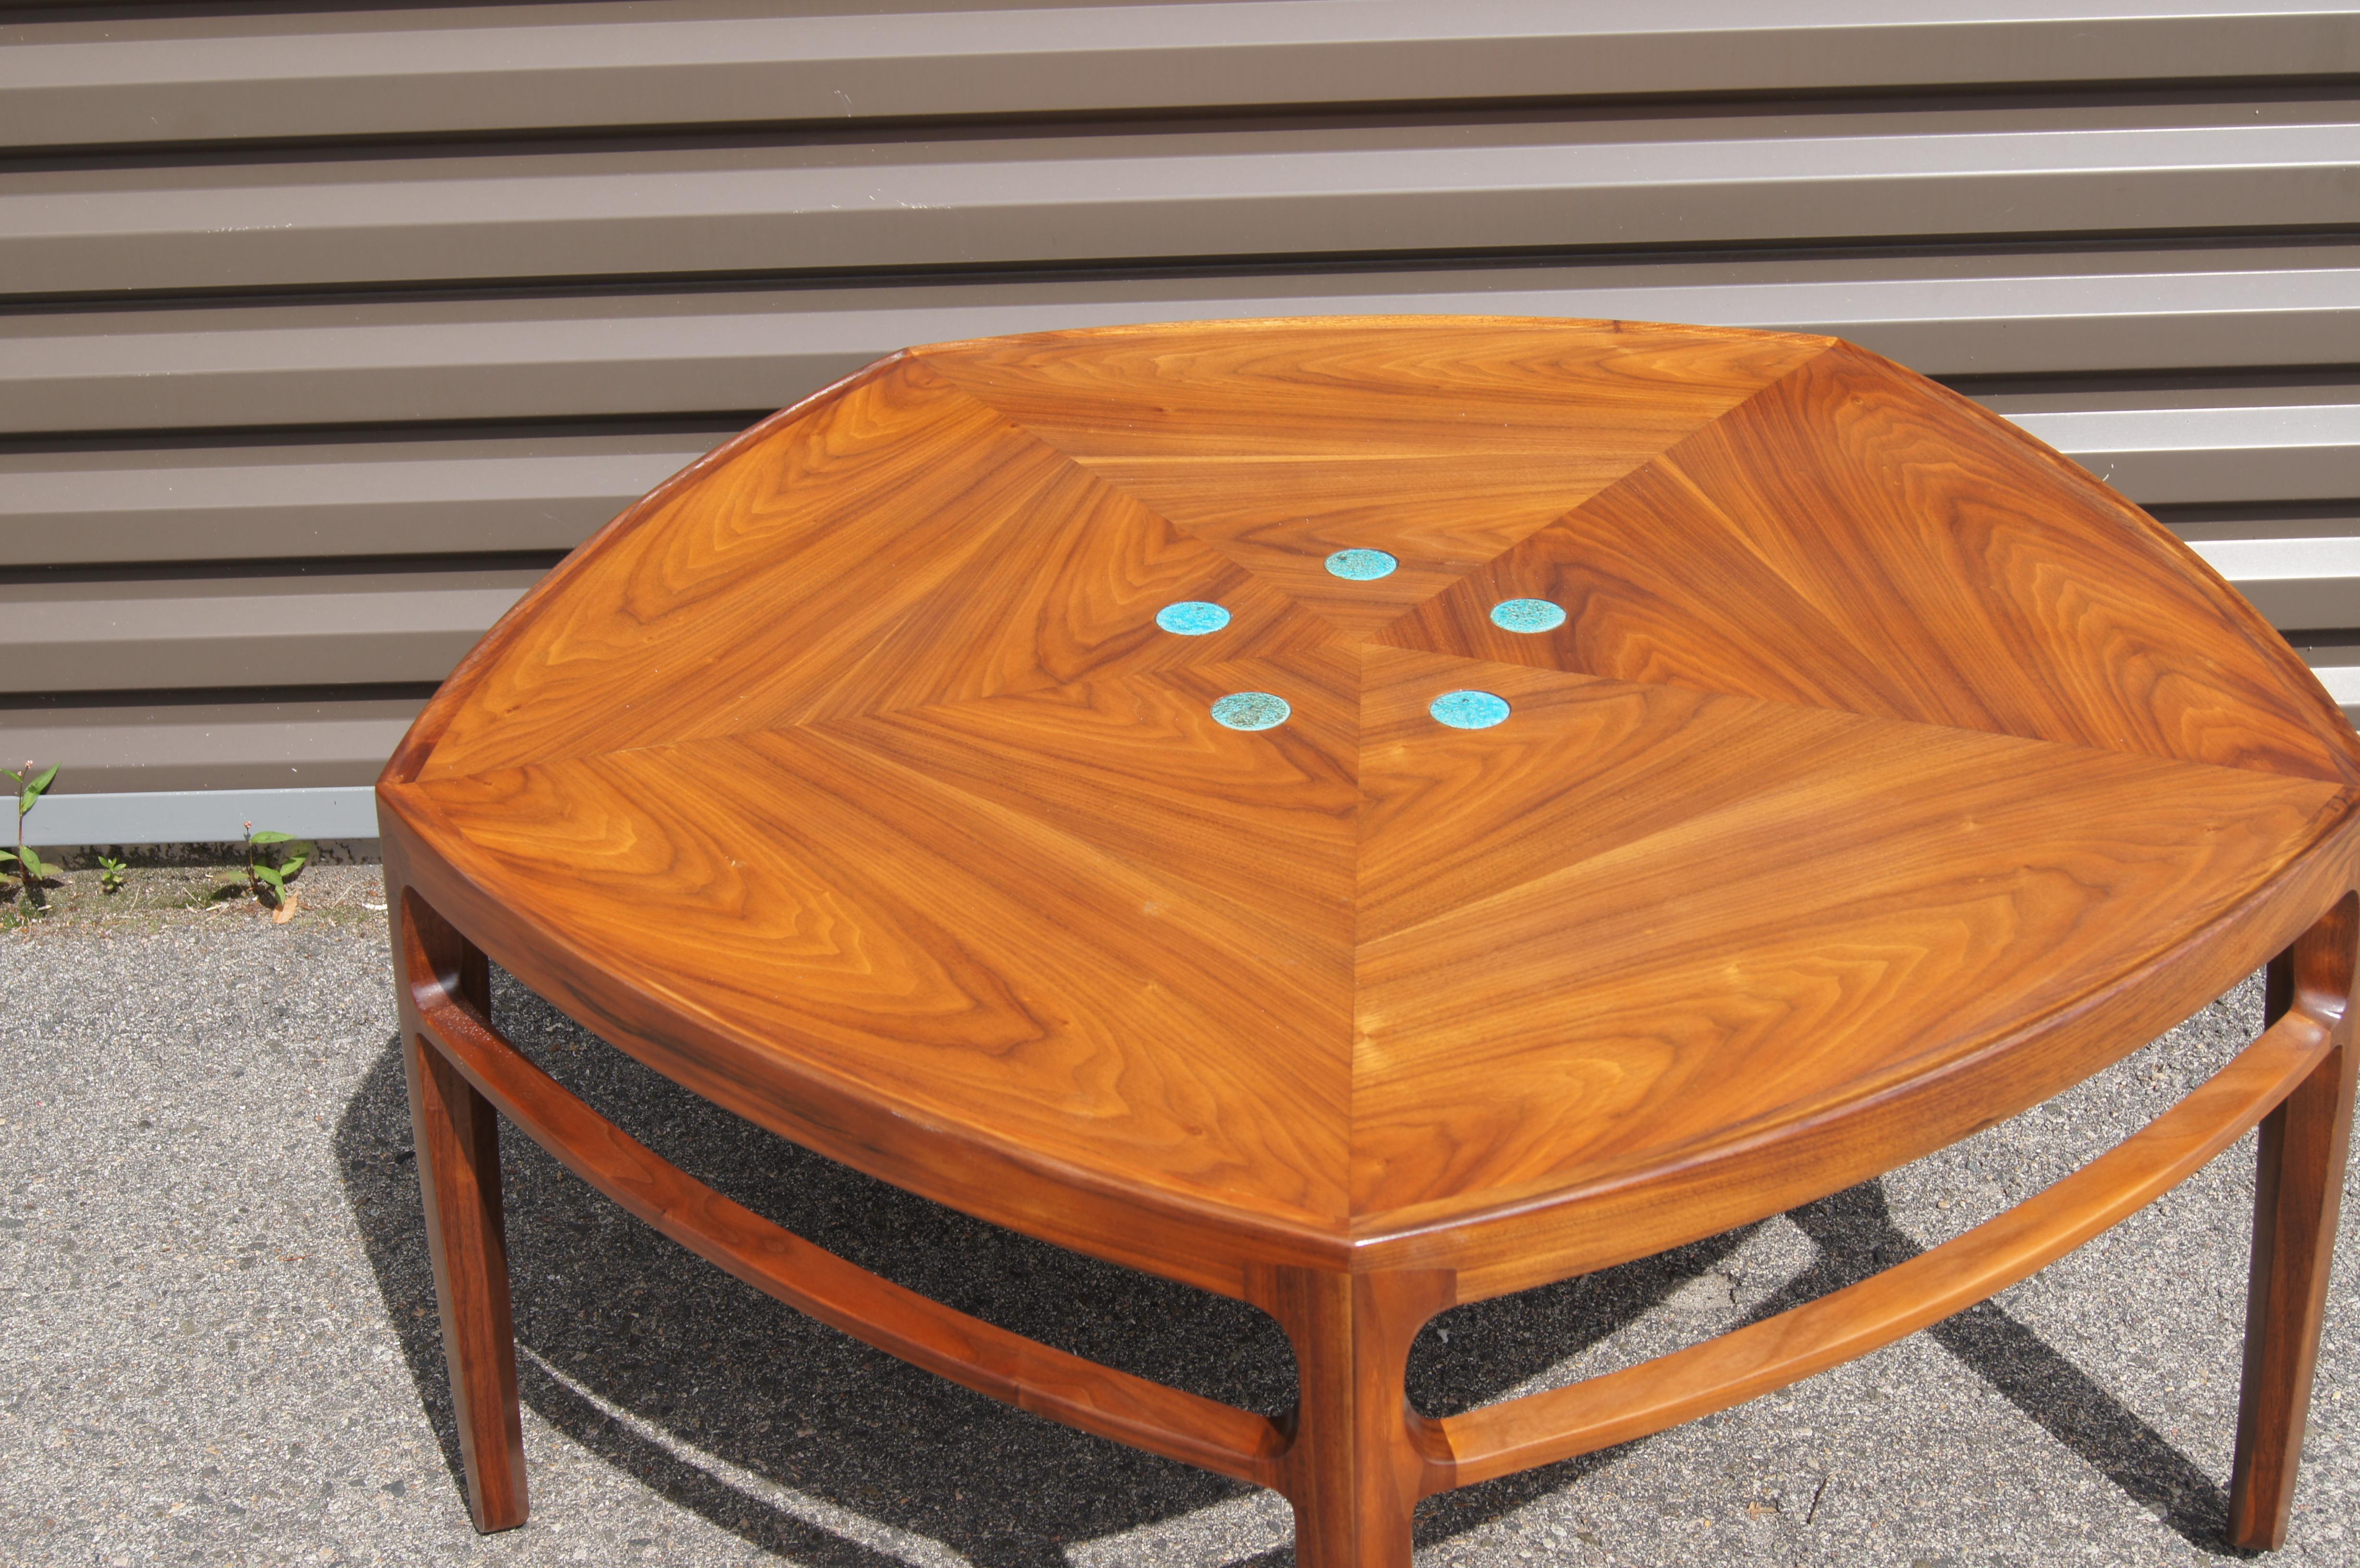 Designed by Edward Wormley in 1957 as part of Dunbar's Janus Collection, this fabulous walnut coffee table, model 5625N, features a pentagonal frame inset with five blue ceramic tiles by Gertrud and Otto Natzler.

The metal Dubar label is found